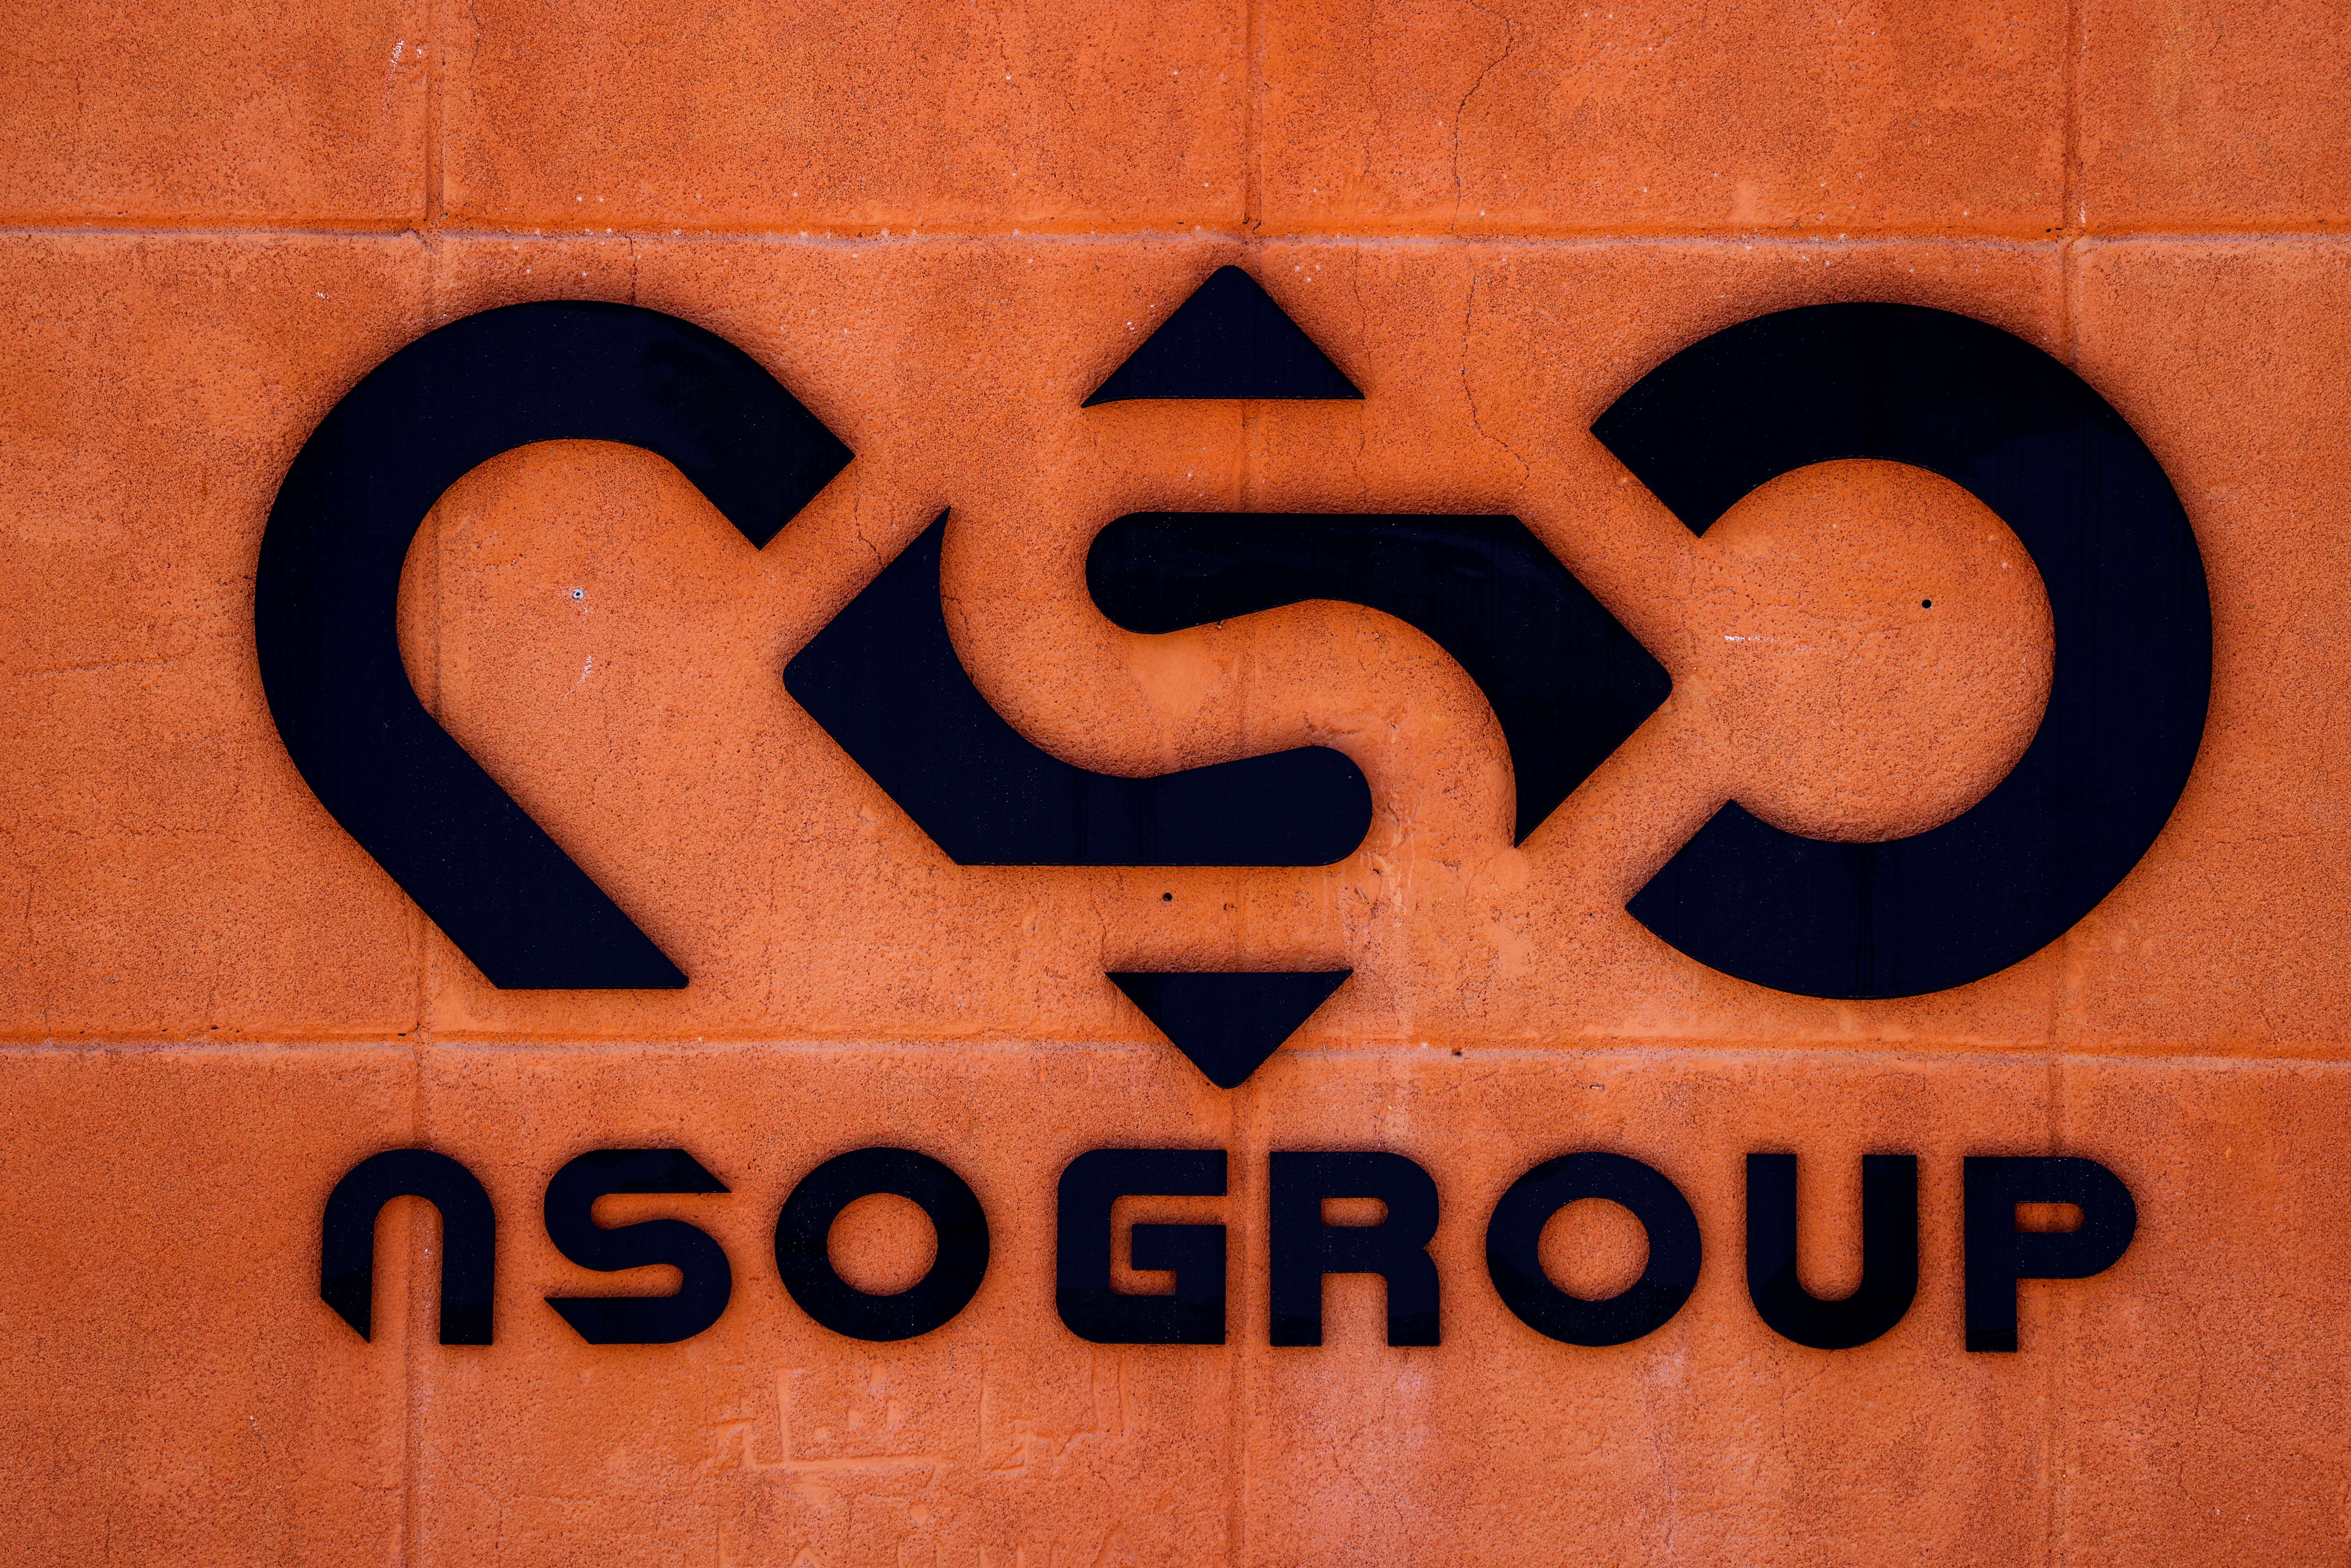 The logo of Israeli cyber firm NSO Group is seen at one of its branches in the Arava Desert, southern Israel July 22, 2021. REUTERS/Amir Cohen